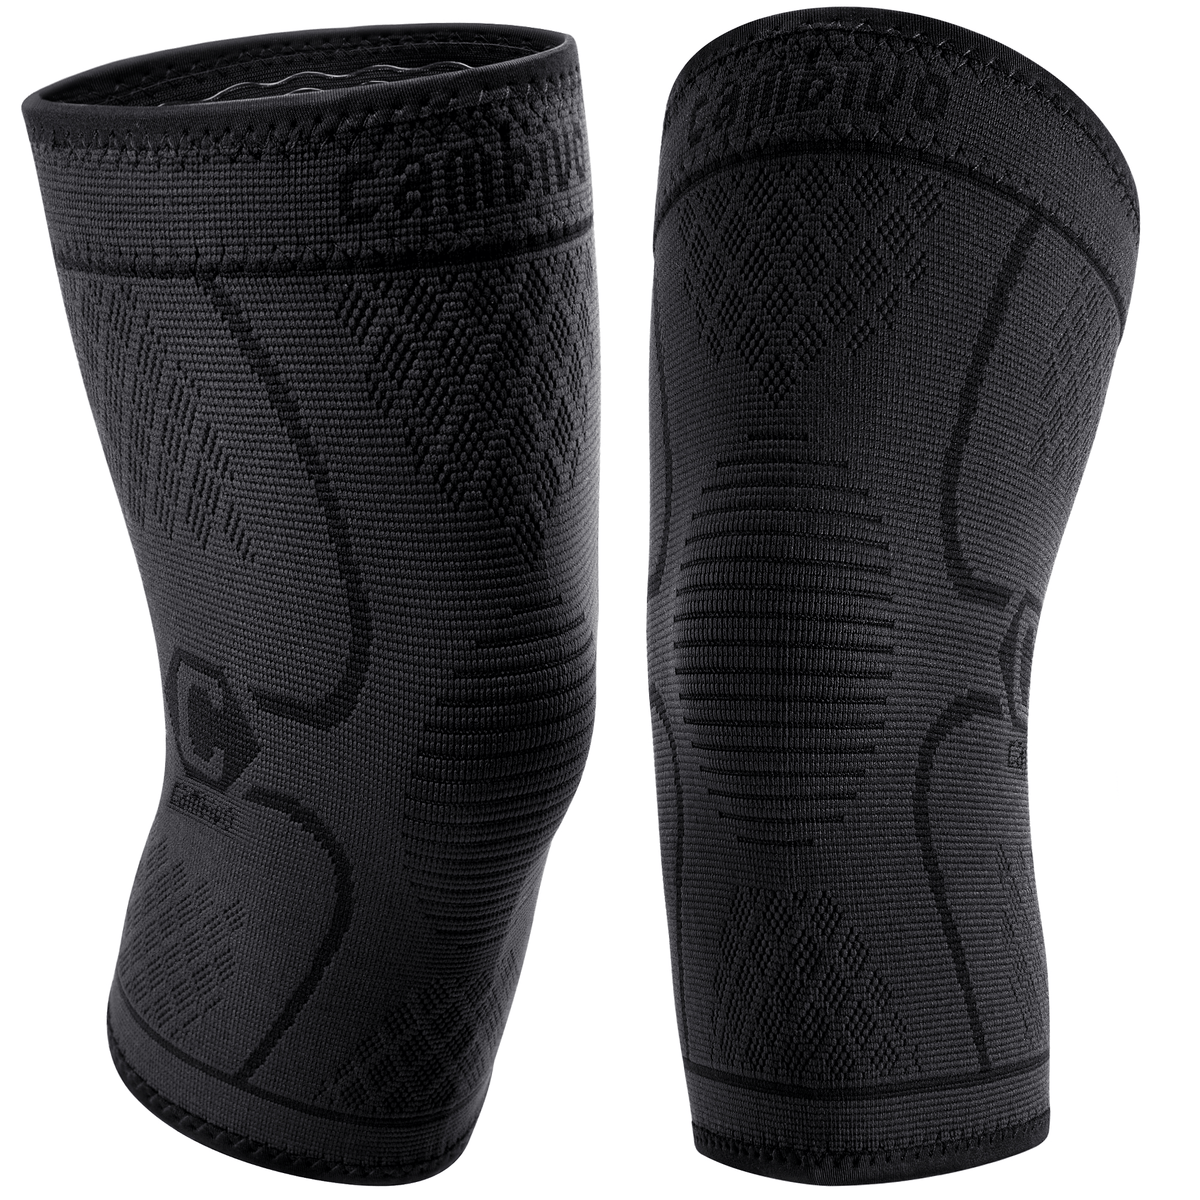 CAMBIVO 2 Pack Knee Brace, Knee Compression Sleeve Support for Men and Women, Knee Pads for Running, Hiking, Meniscus Tear, Arthritis, Joint Pain Relief Large Black